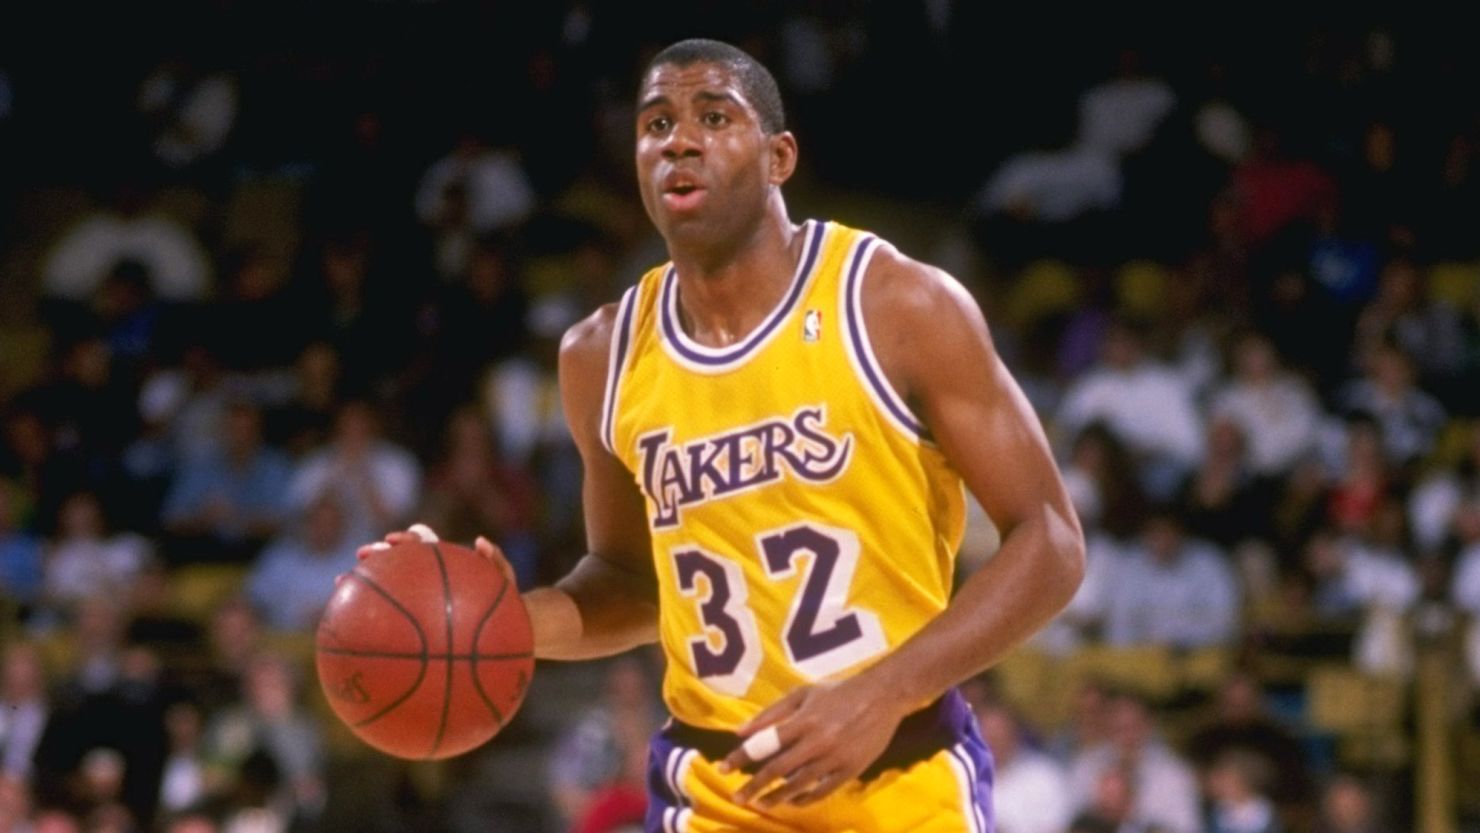 1989-1990:  Guard Magic Johnson of the Los Angeles Lakers in action during a game at the Great Western Forum in Inglewood, California. Mandatory Credit: Stephen Dunn  /Allsport